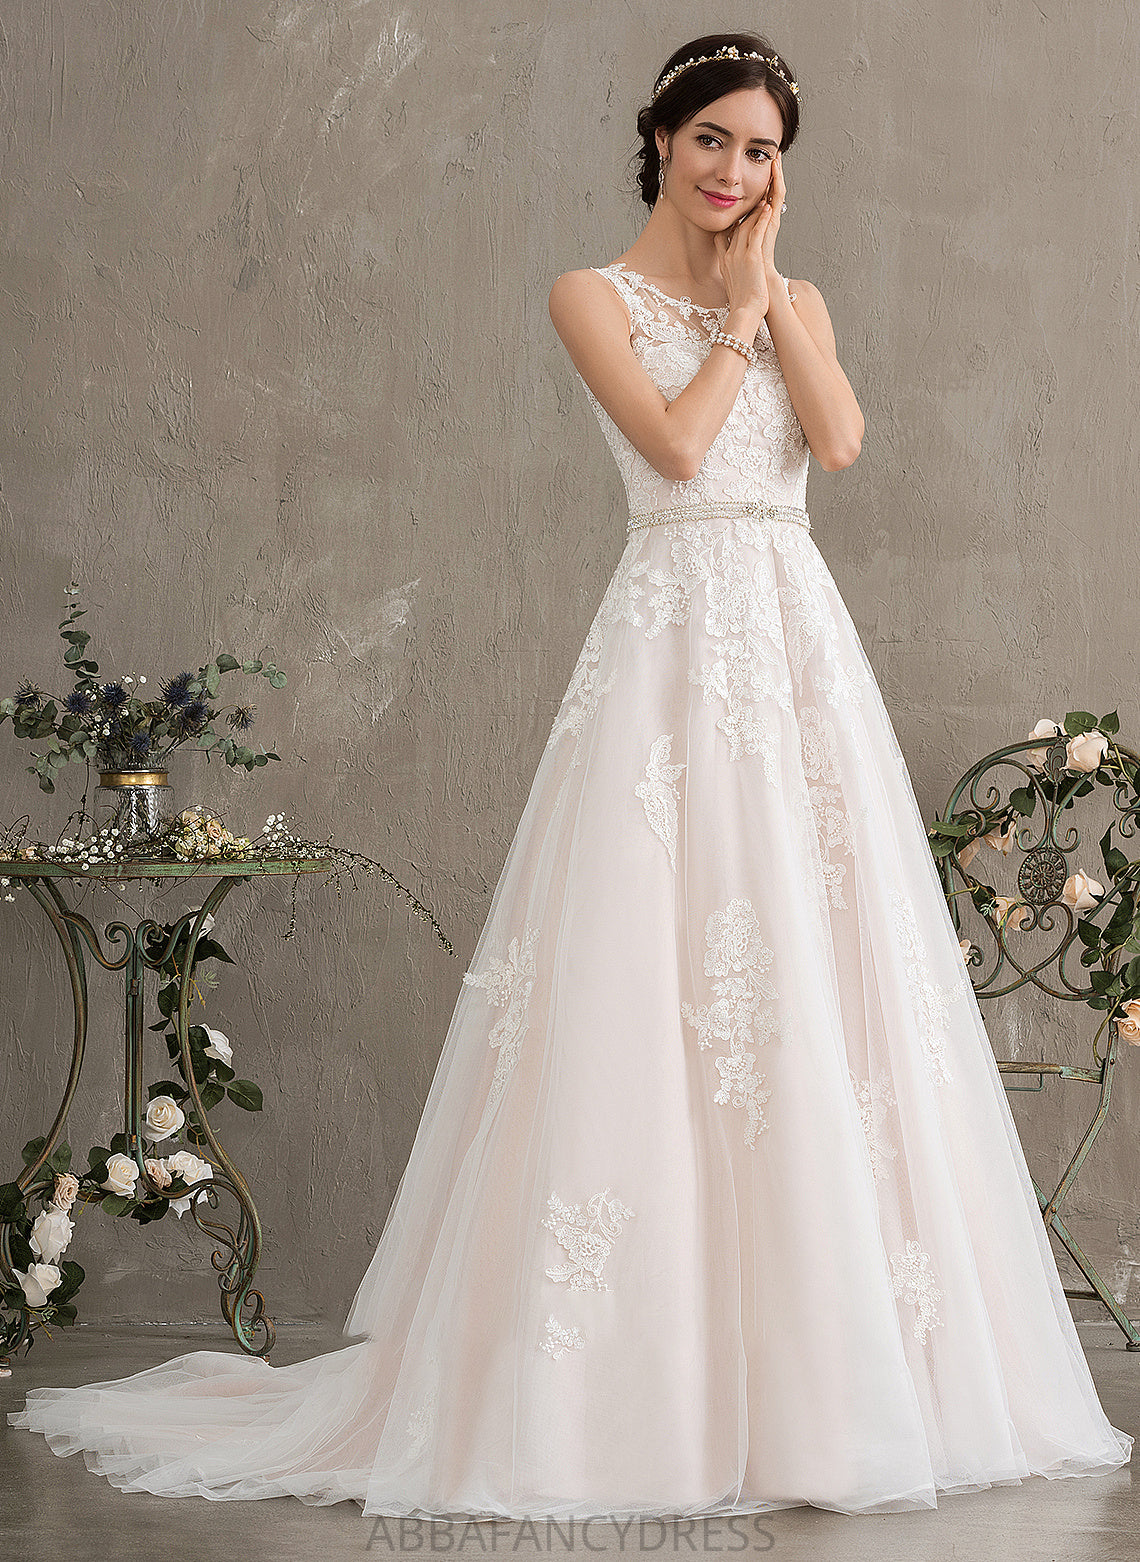 Dress Tulle Kassidy Scoop Sequins Wedding Beading Wedding Dresses Neck With Court Ball-Gown/Princess Train